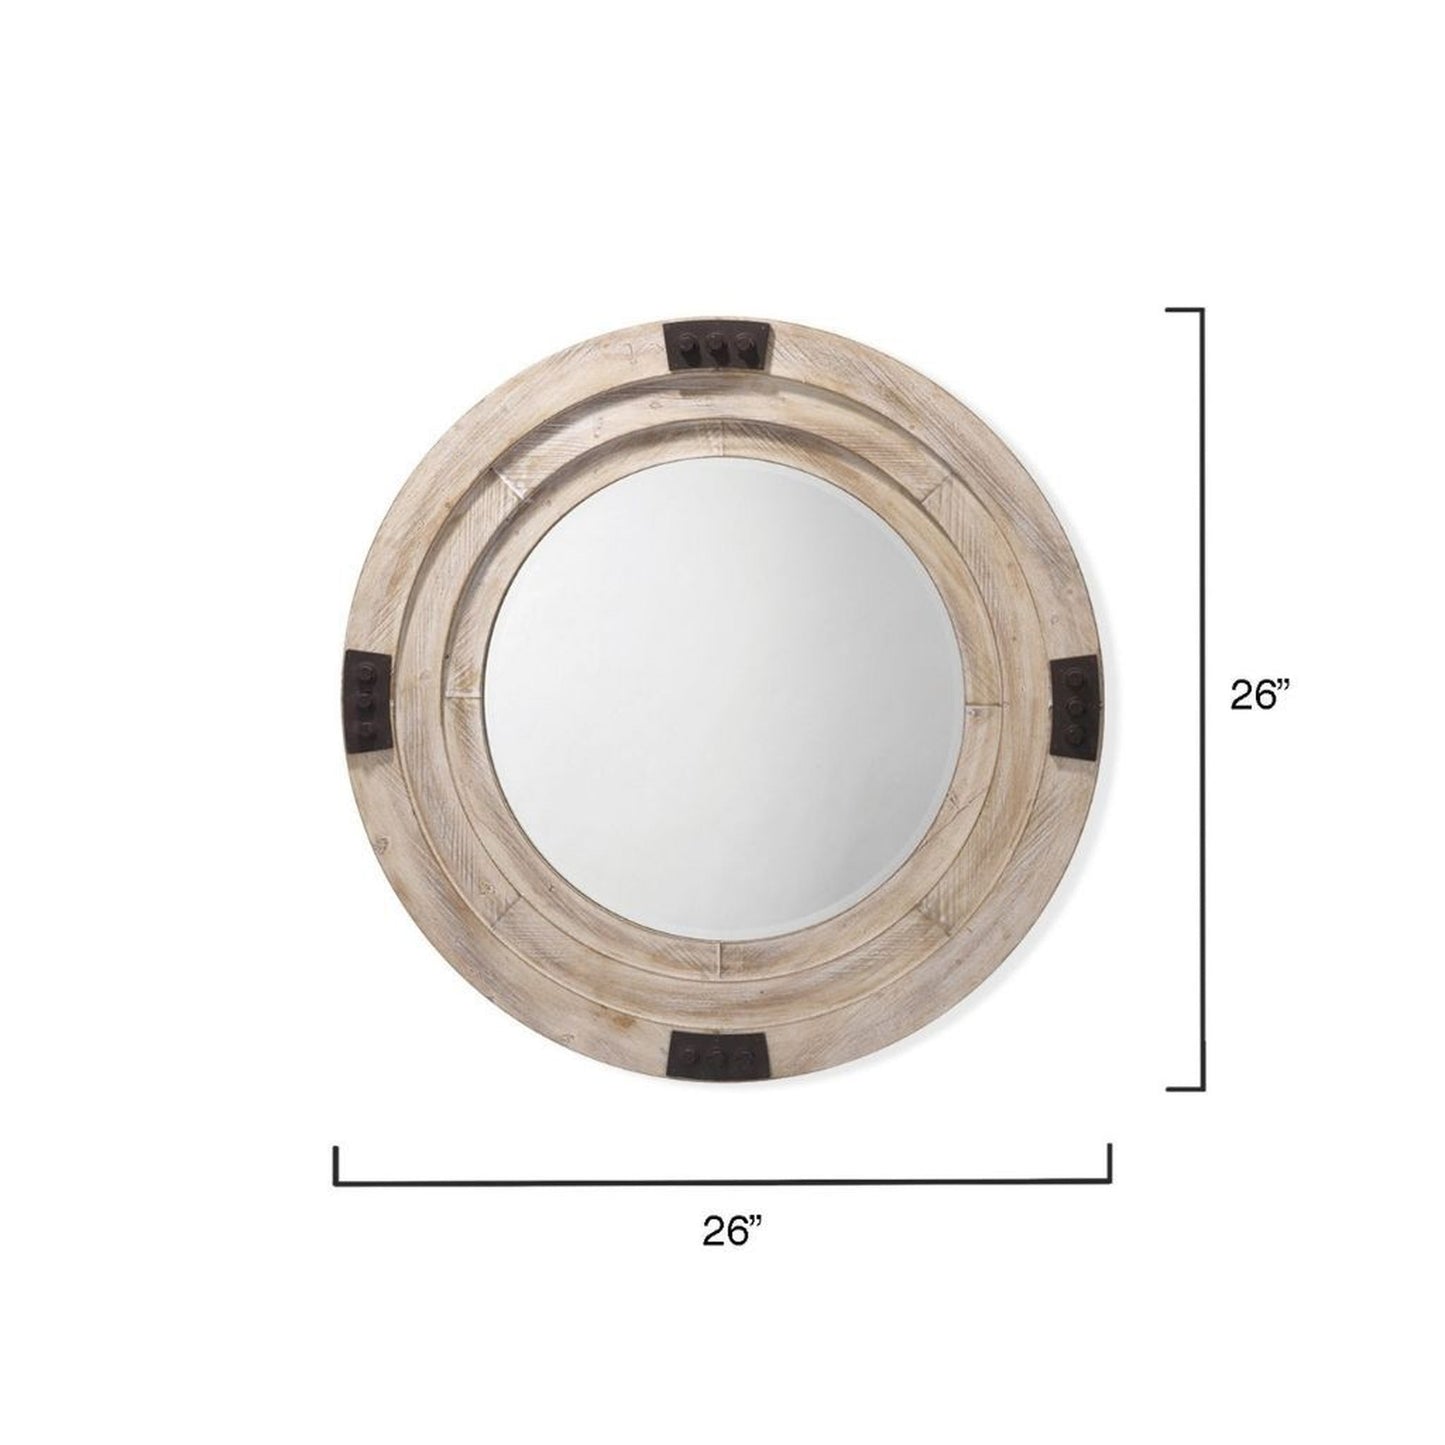 Jamie Young Foreman 36" Round Mirror With White Washed Wood Frame and Iron Metal Accents